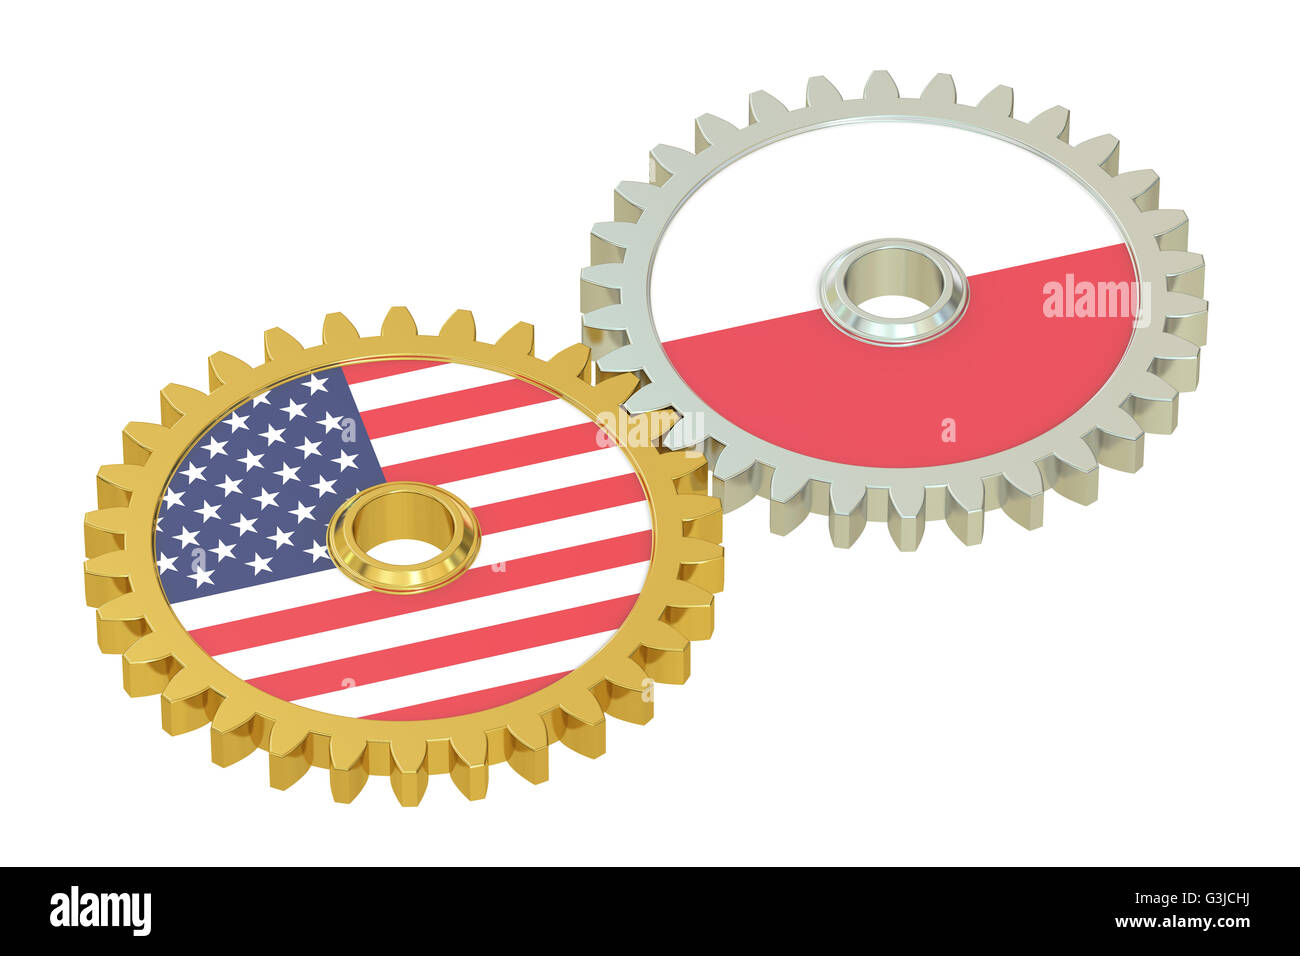 USA and Poland flags on a gears, 3D rendering isolated on white background Stock Photo